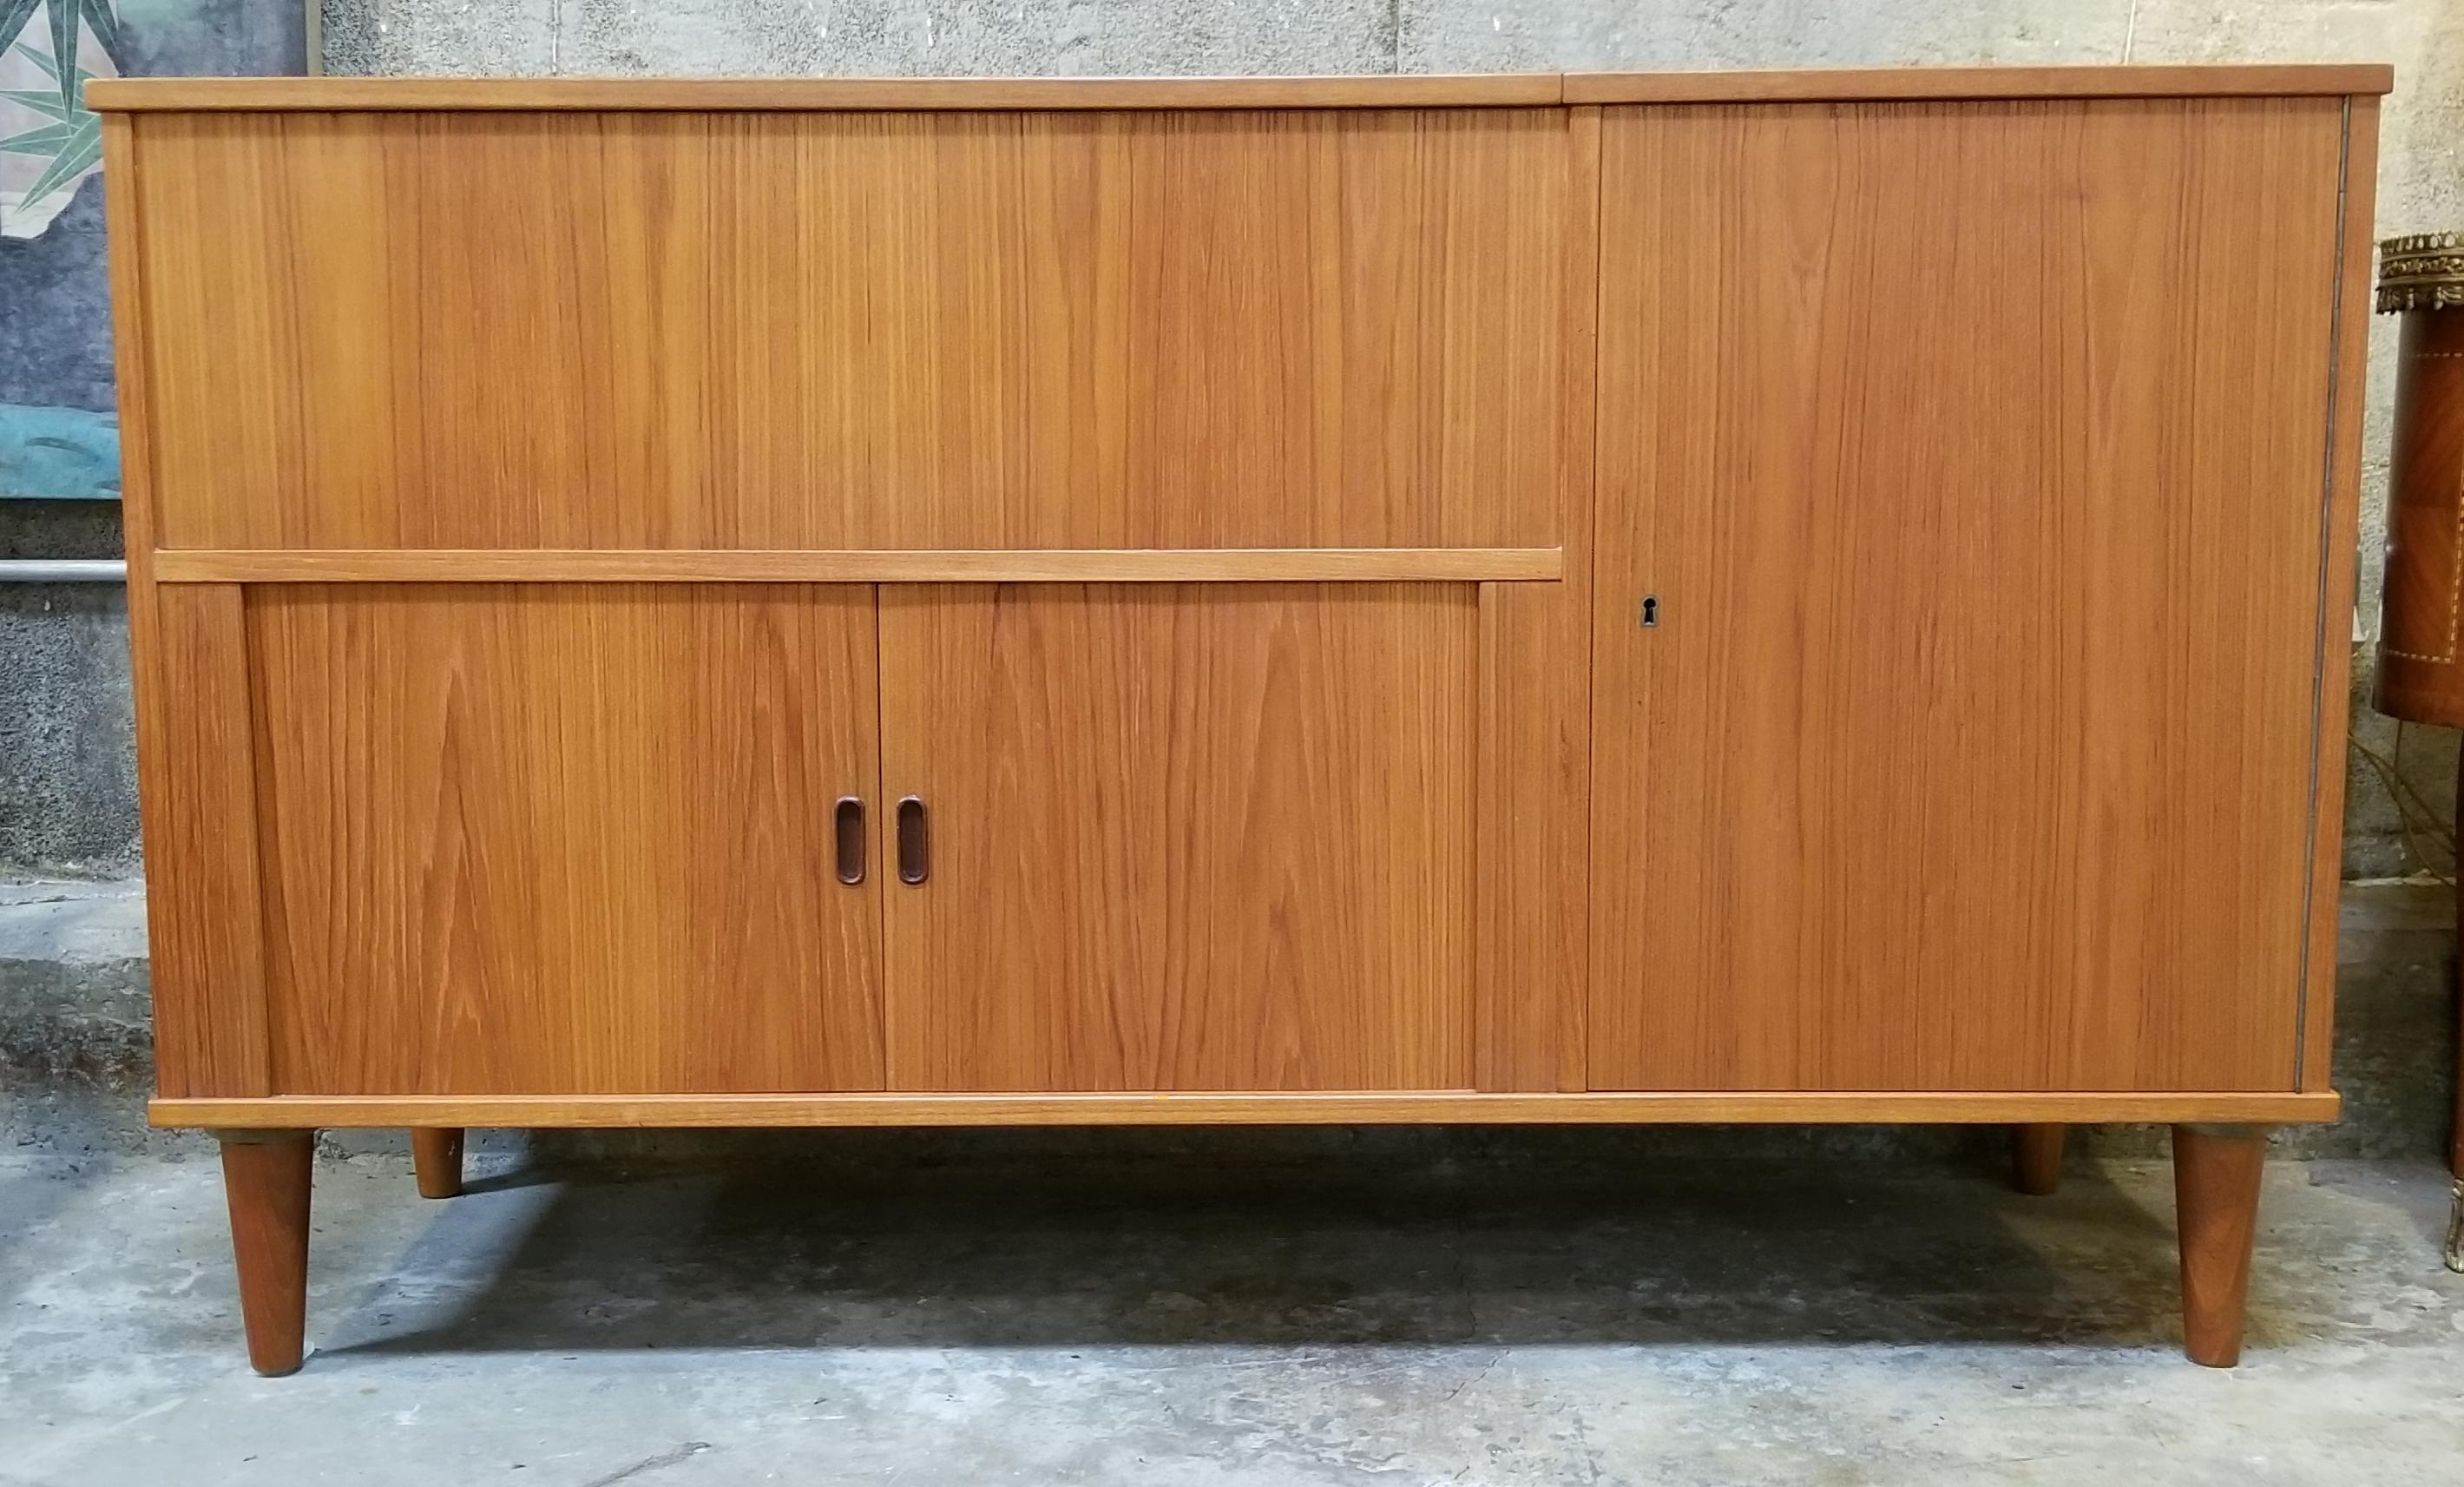 A 1960s teak Danish Modern stereo cabinet featuring a lift-up top, tambour doors and a locking cabinet with shelf. In exceptional original vintage condition with original finish. Classic peg leg detail. In the manner of Arne Vodder.